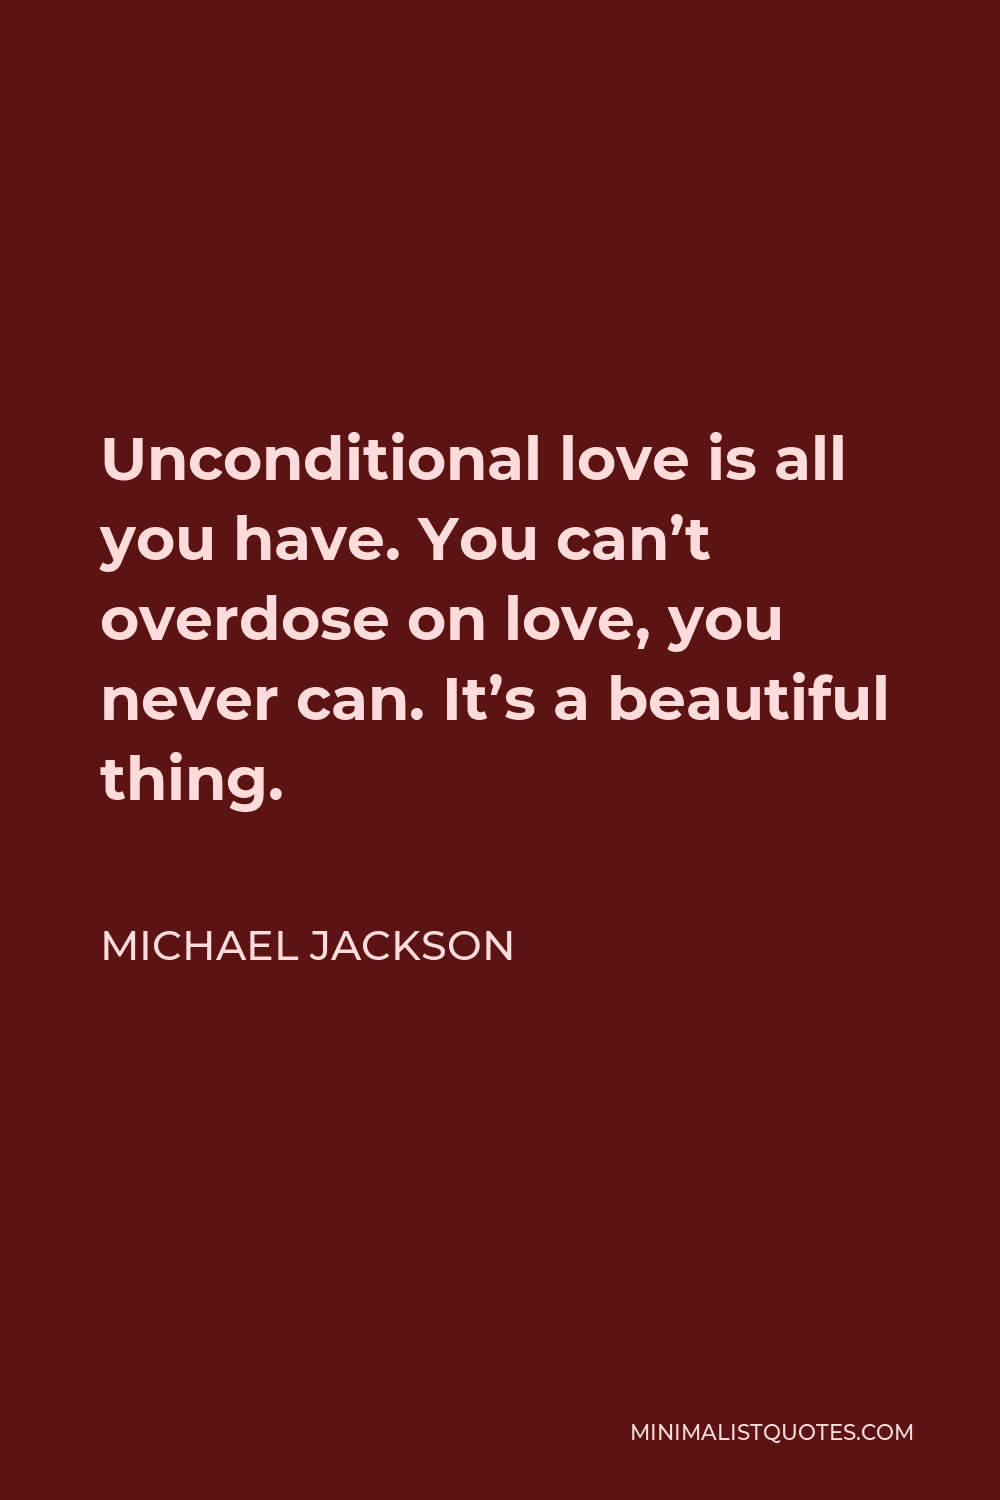 Michael Jackson Quote - Unconditional love is all you have. You can’t overdose on love, you never can. It’s a beautiful thing.